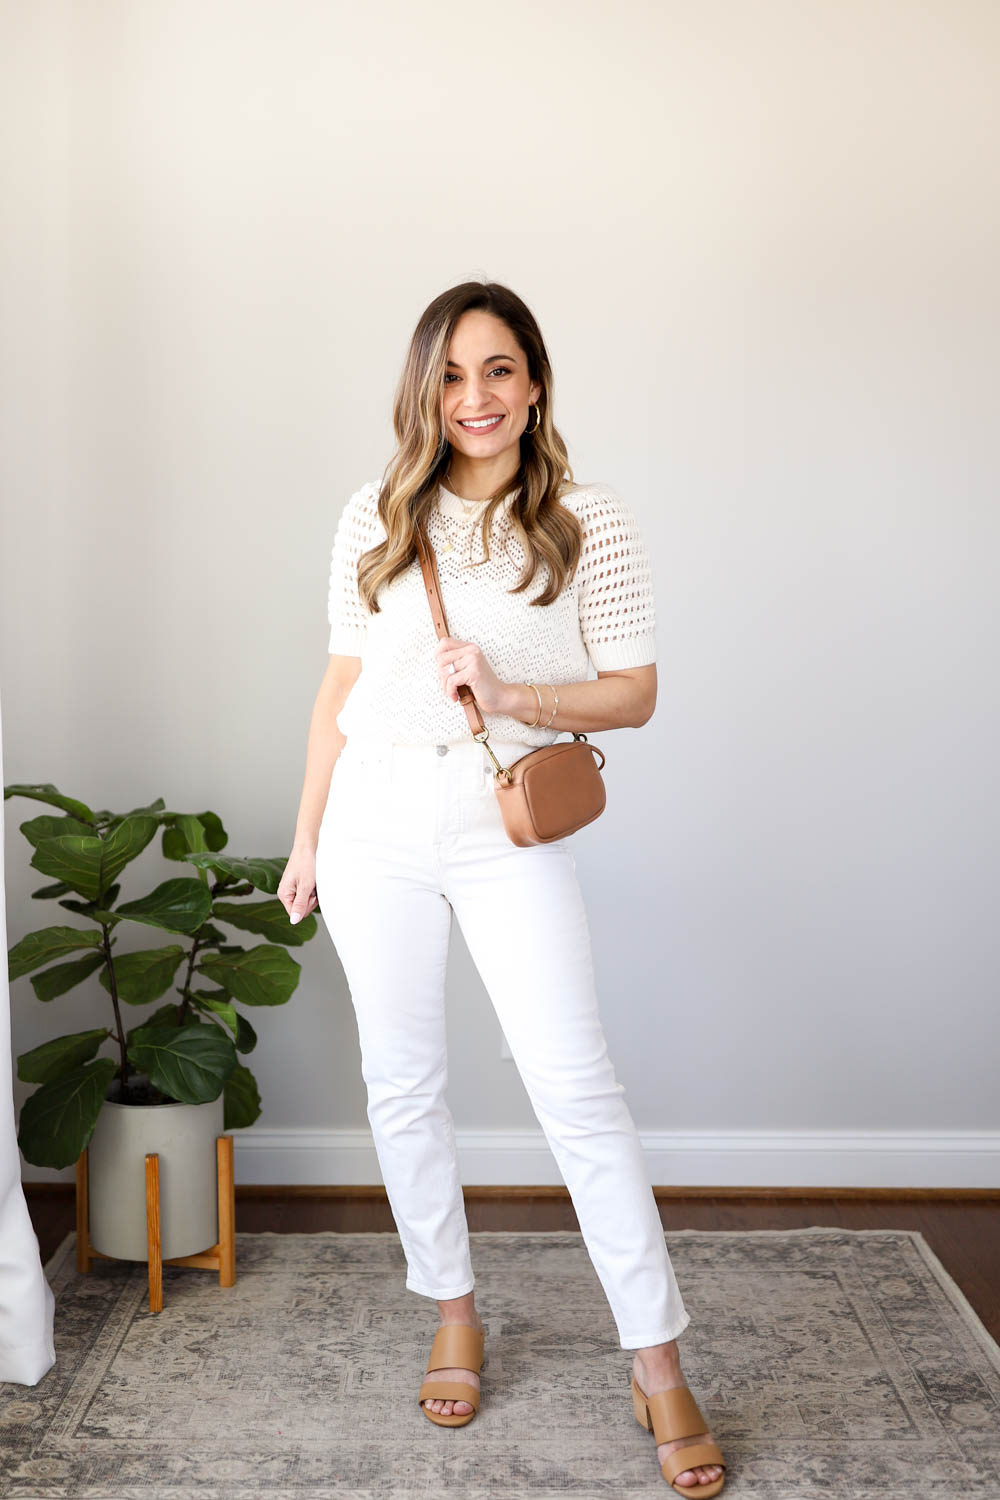 5 Denim and White Top Outfits - Pumps & Push Ups